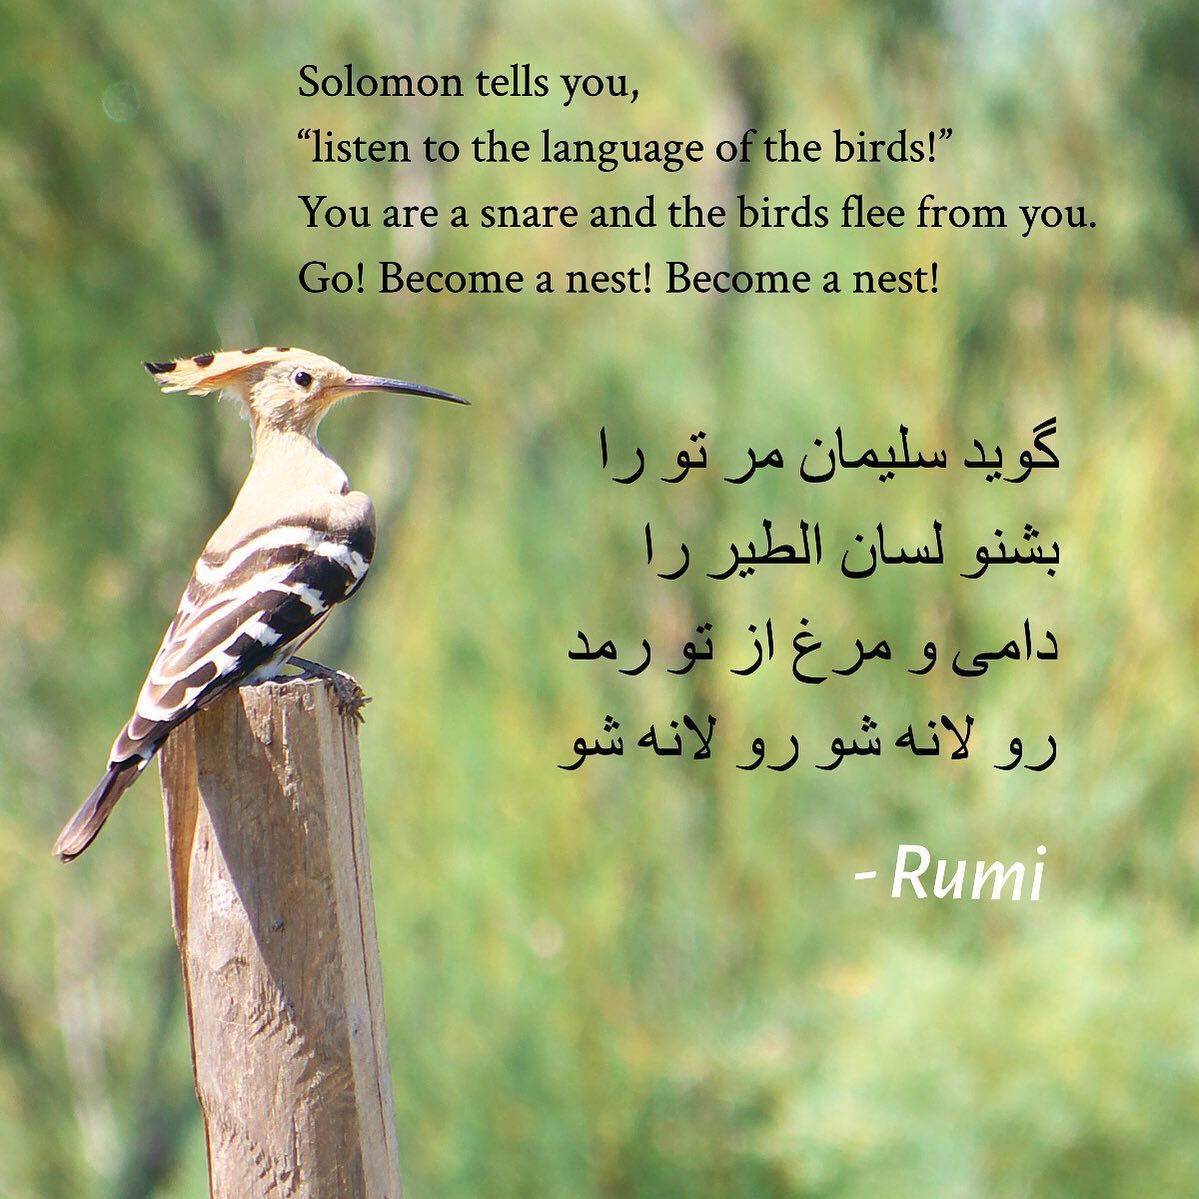 You are currently viewing Solomon tells you, “Listen to the language of the birds” from Hilat Raha Kon – Rumi